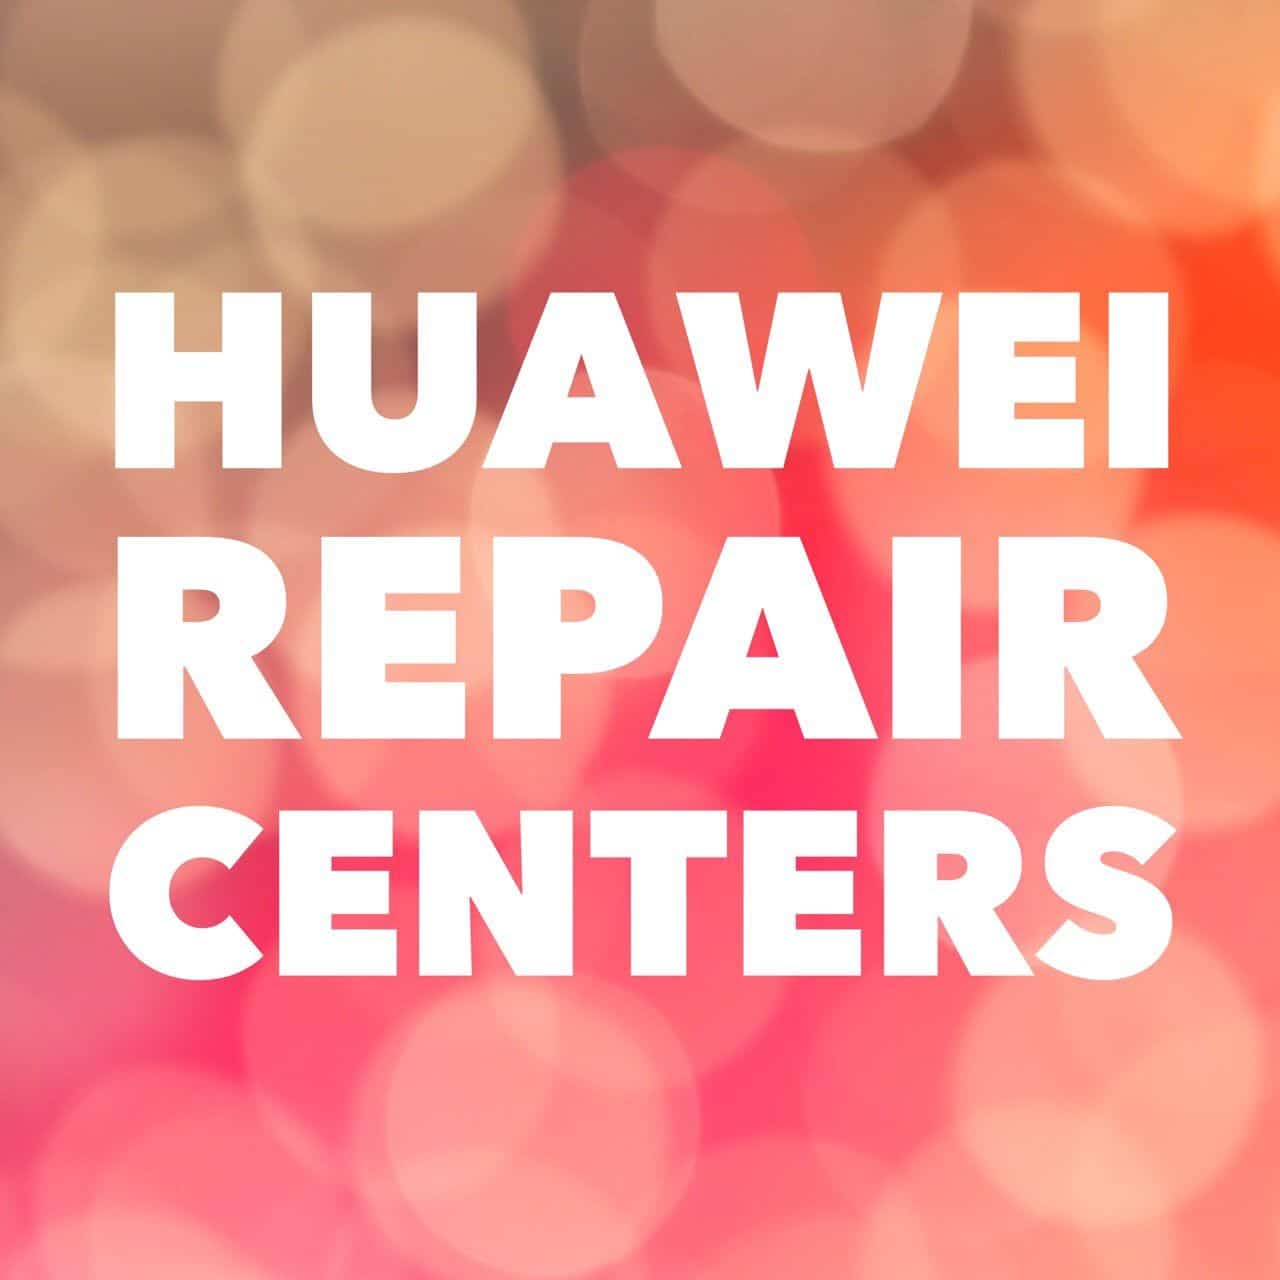 Huawei repair centers authorized.